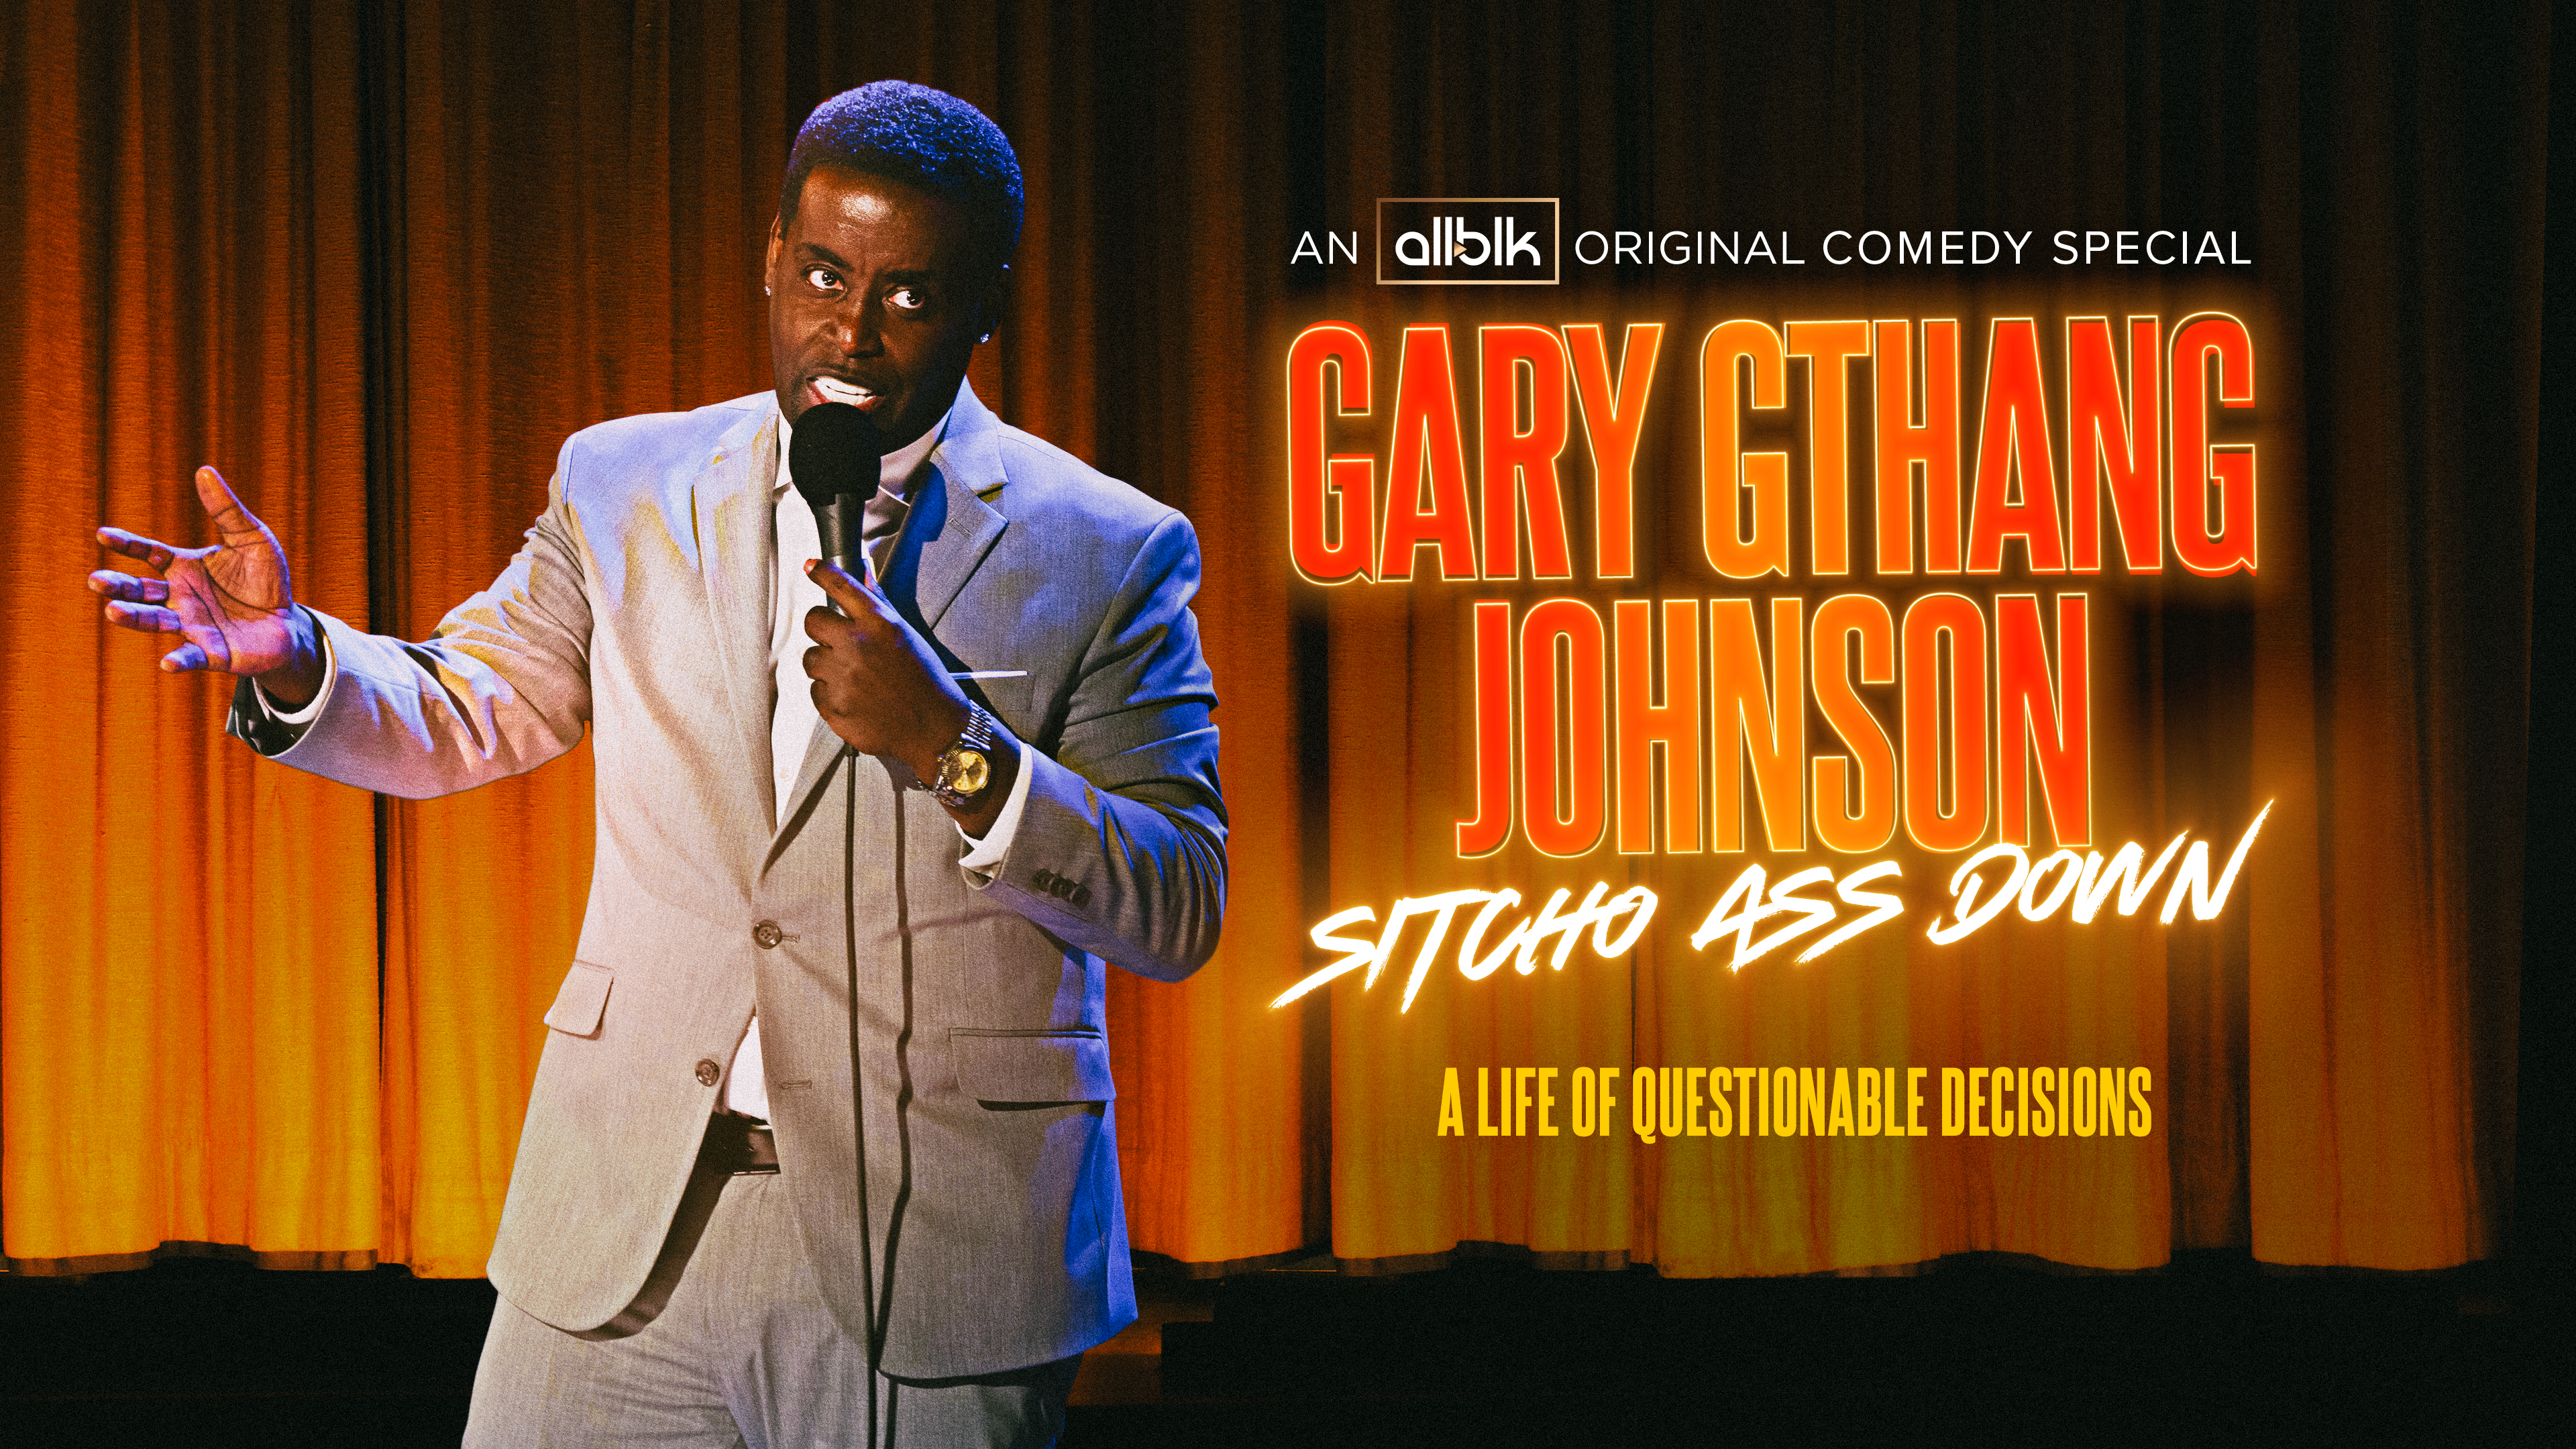 ALLBLK Trailer Exclusive: Comedian Gary ‘G Thang’ Johnson Provides Side-Splitting Laughter In ‘Sitcho A** Down’